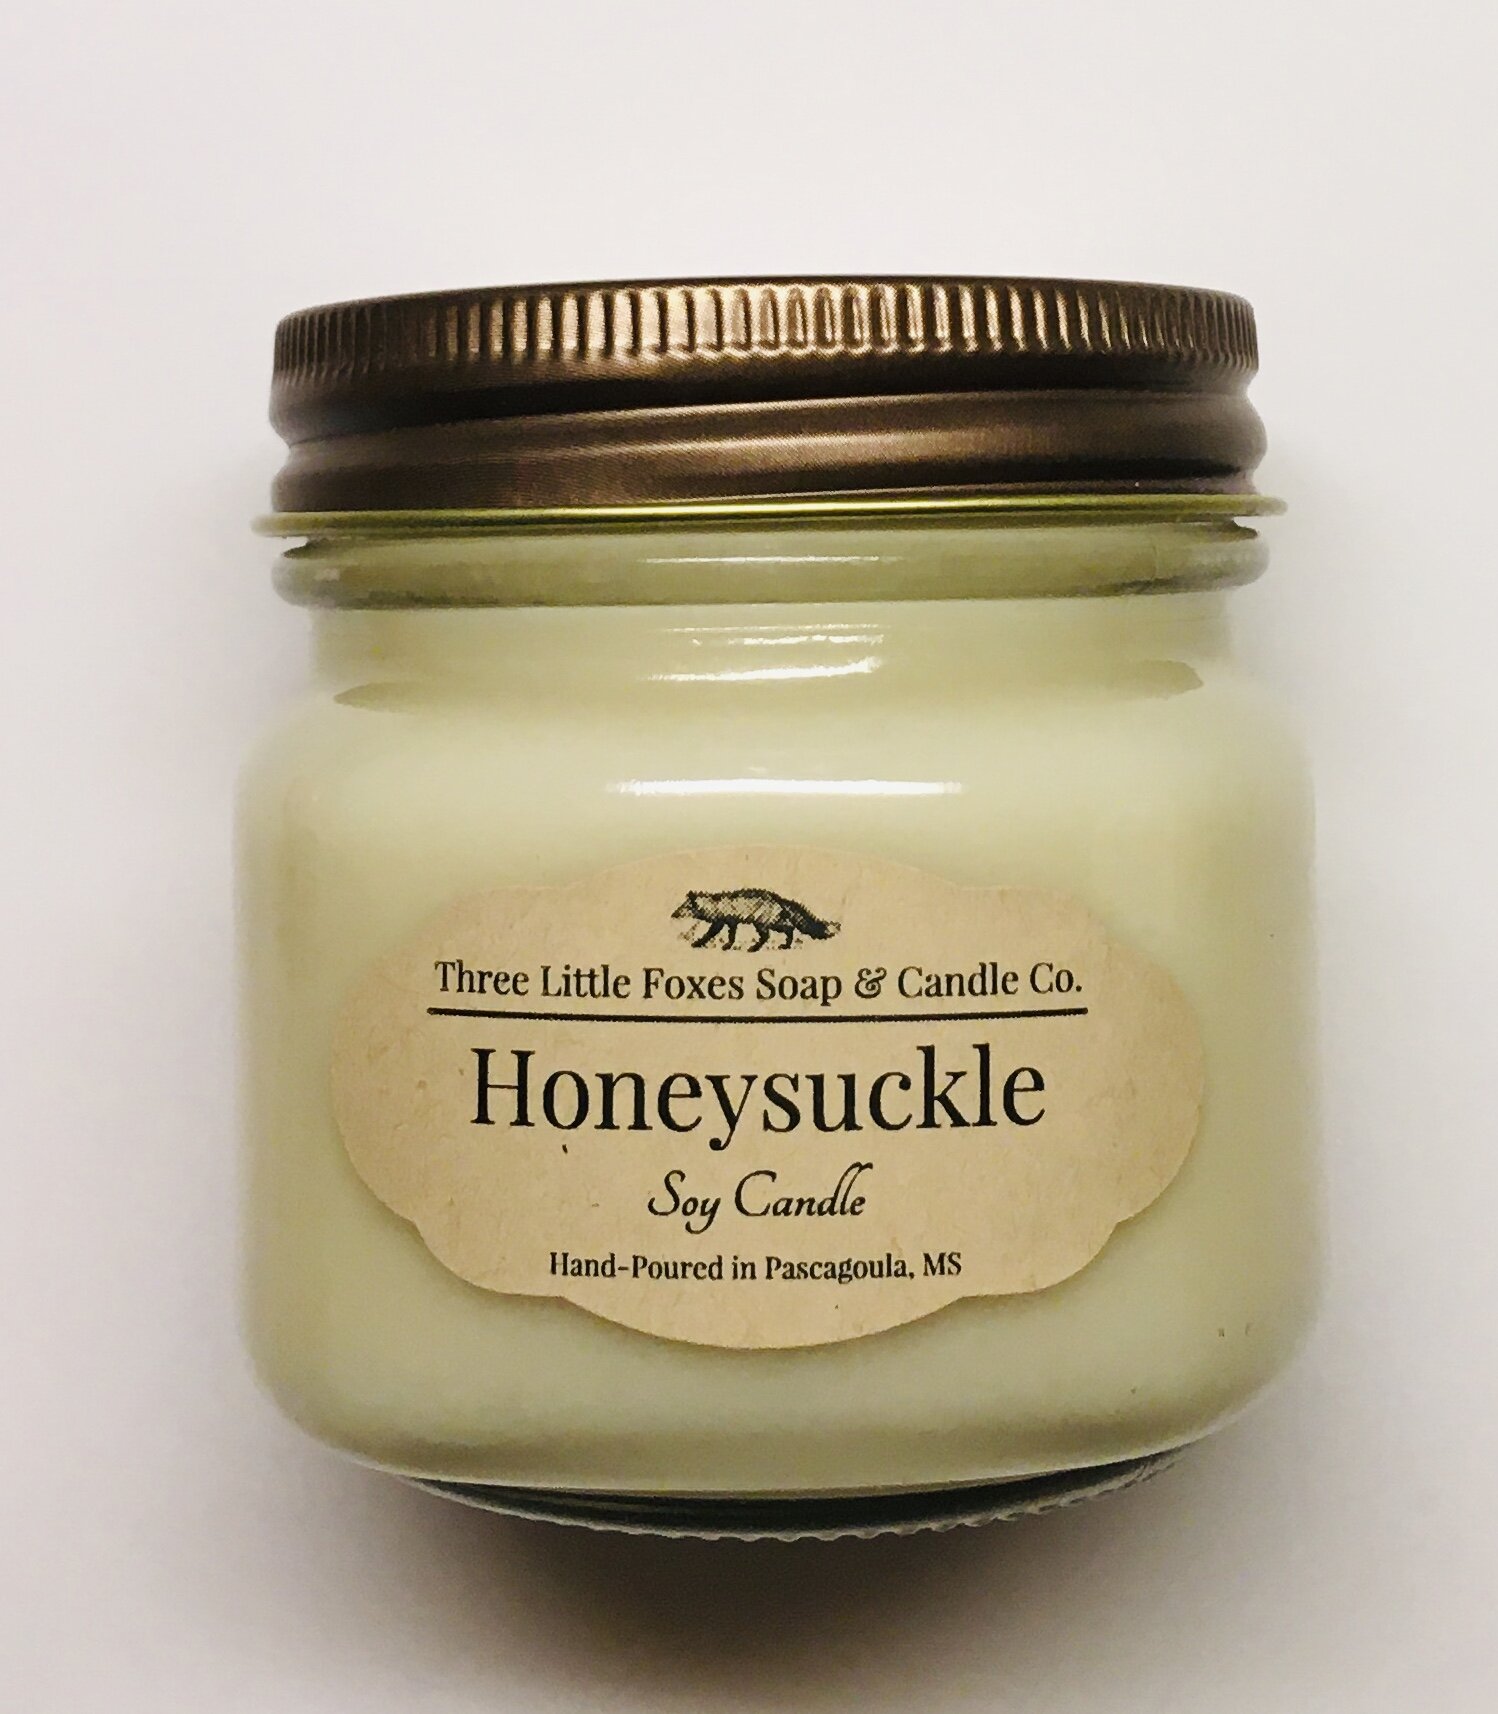 Honeysuckle Soy Candles